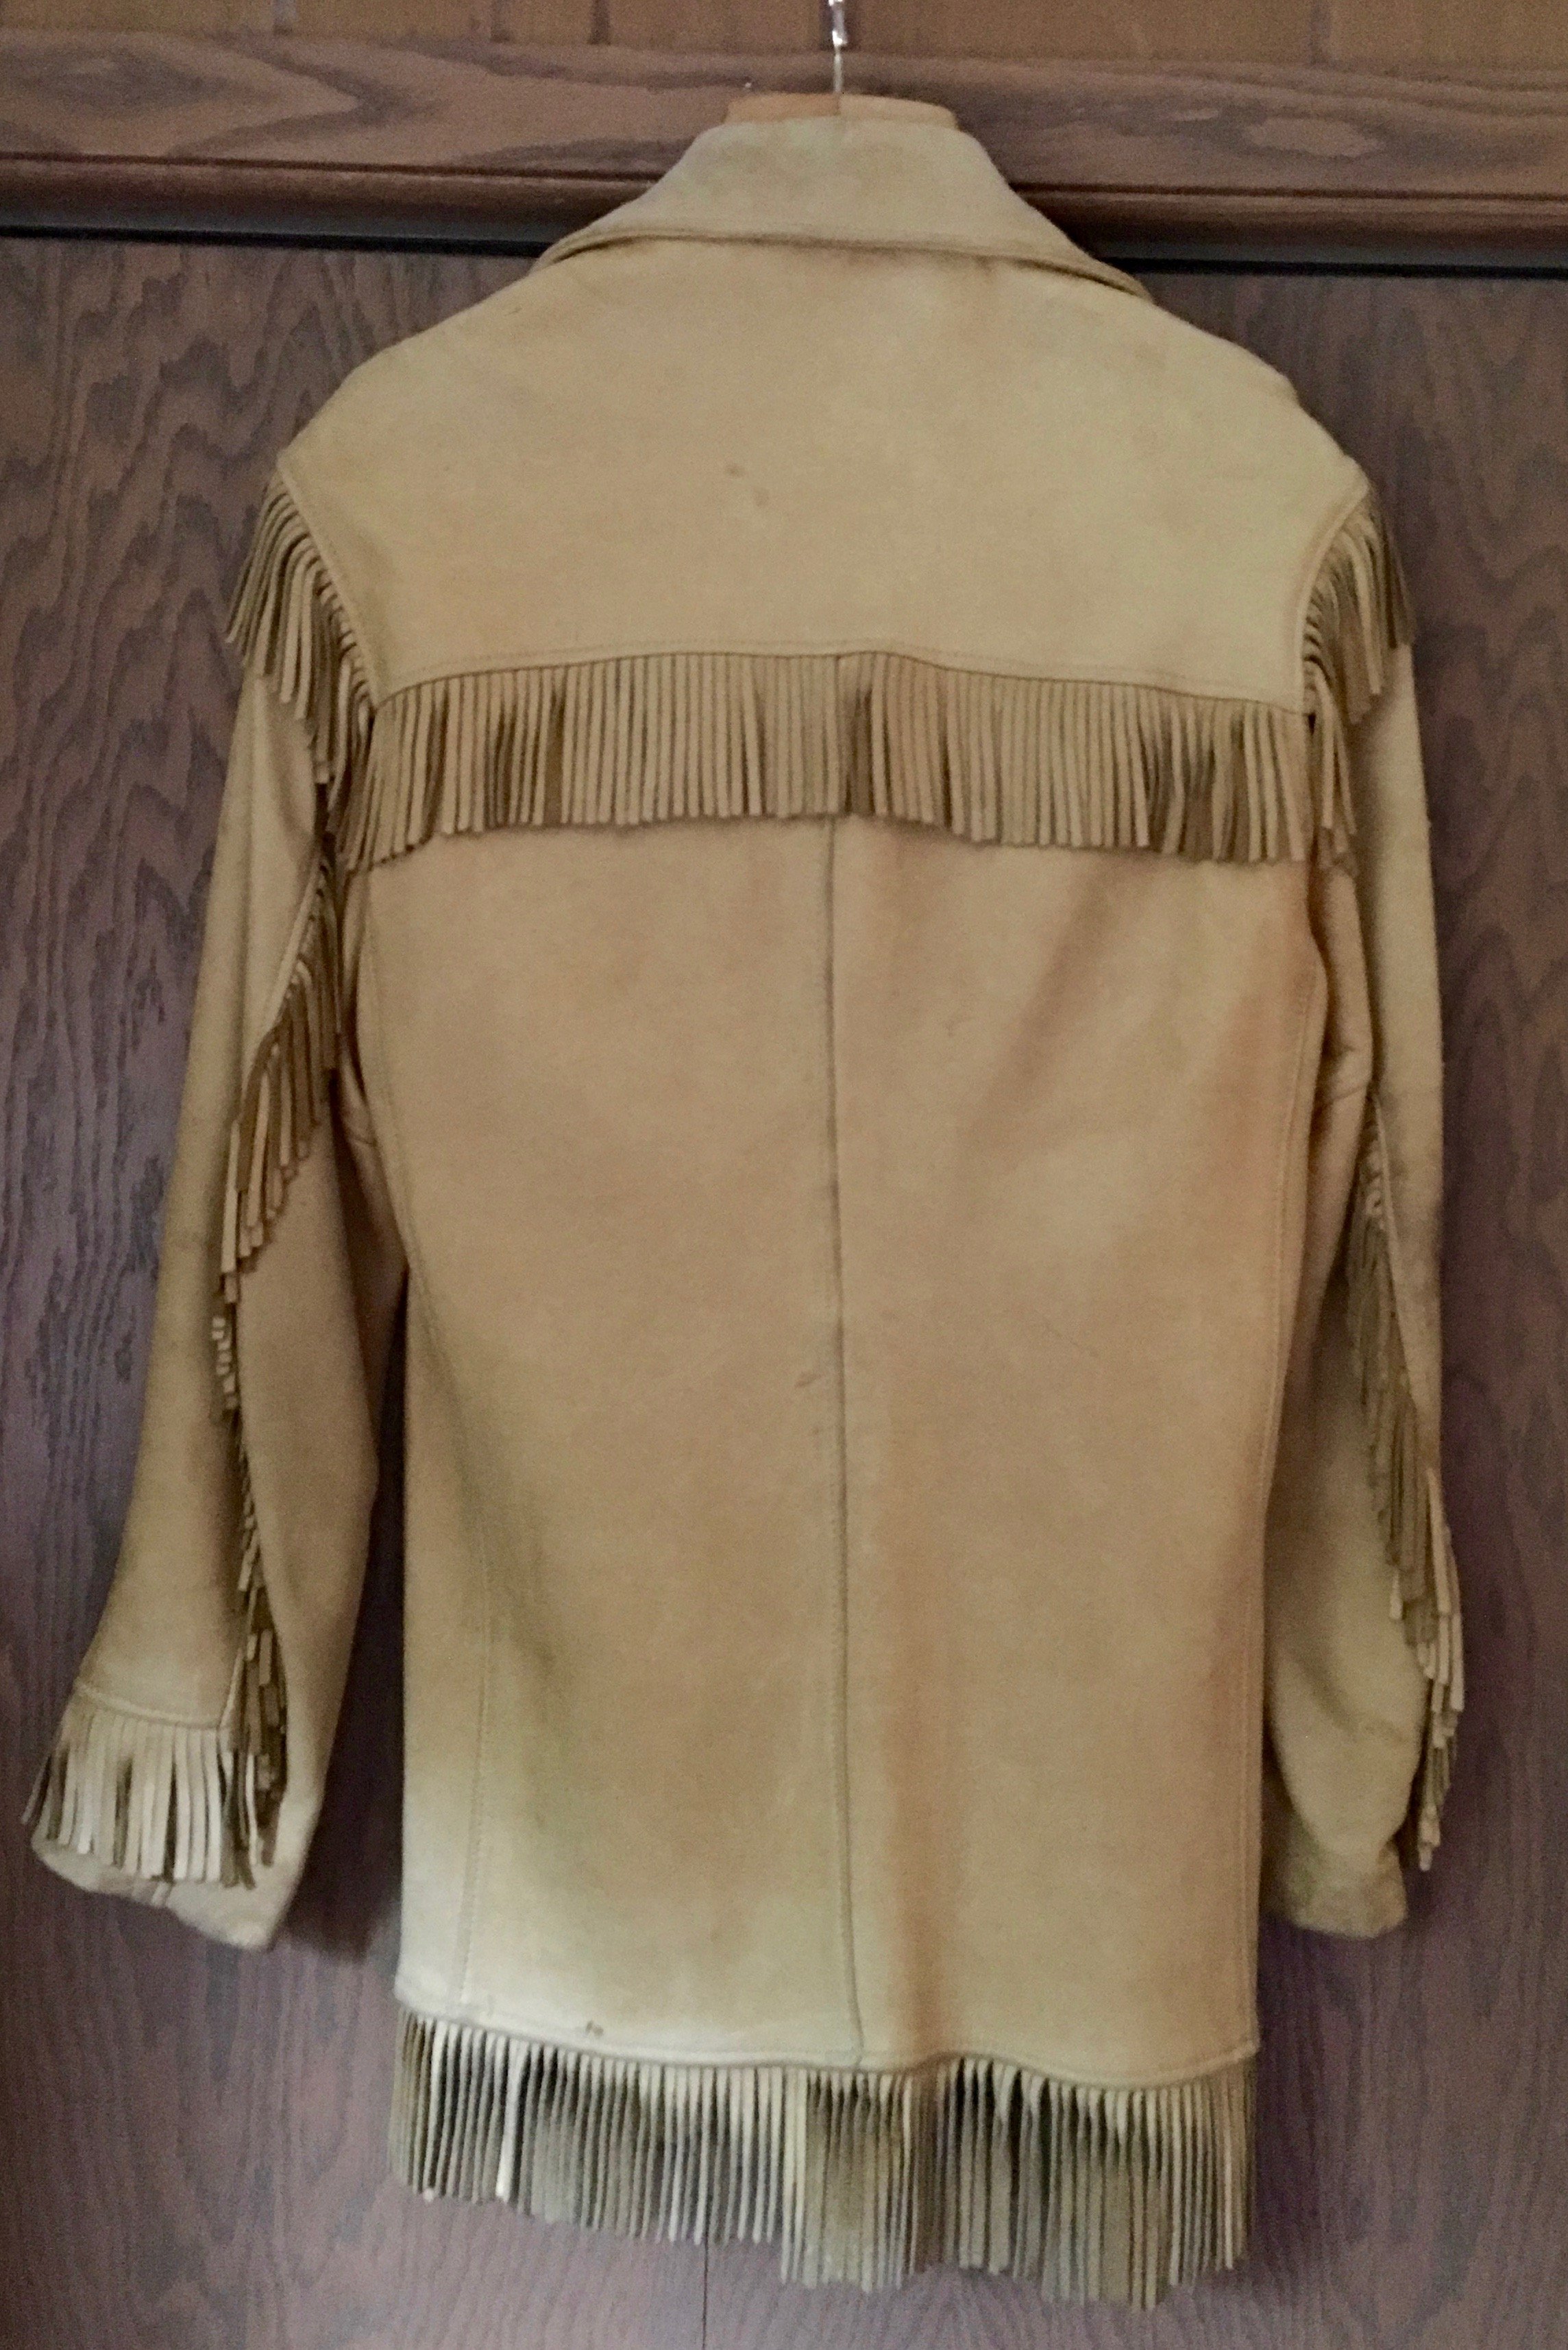 SOLD PENDING FUNDS BUCKSKIN JACKET FOR SALE SIZE 42 L - SASS Wire ...